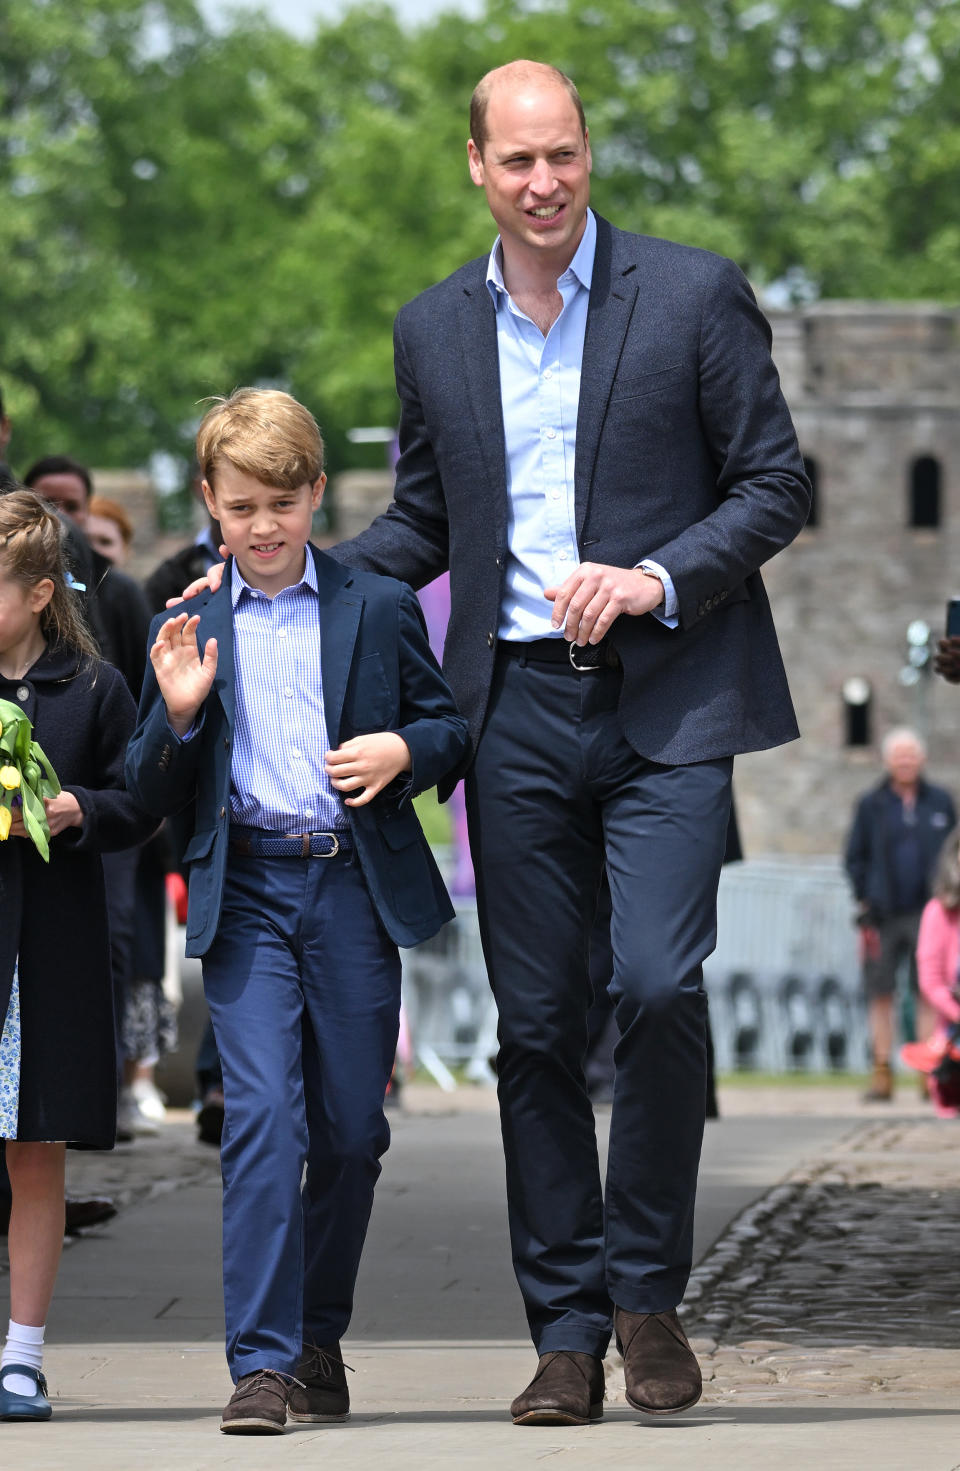 Prince George and Prince William at Cardiff Castle in Wales